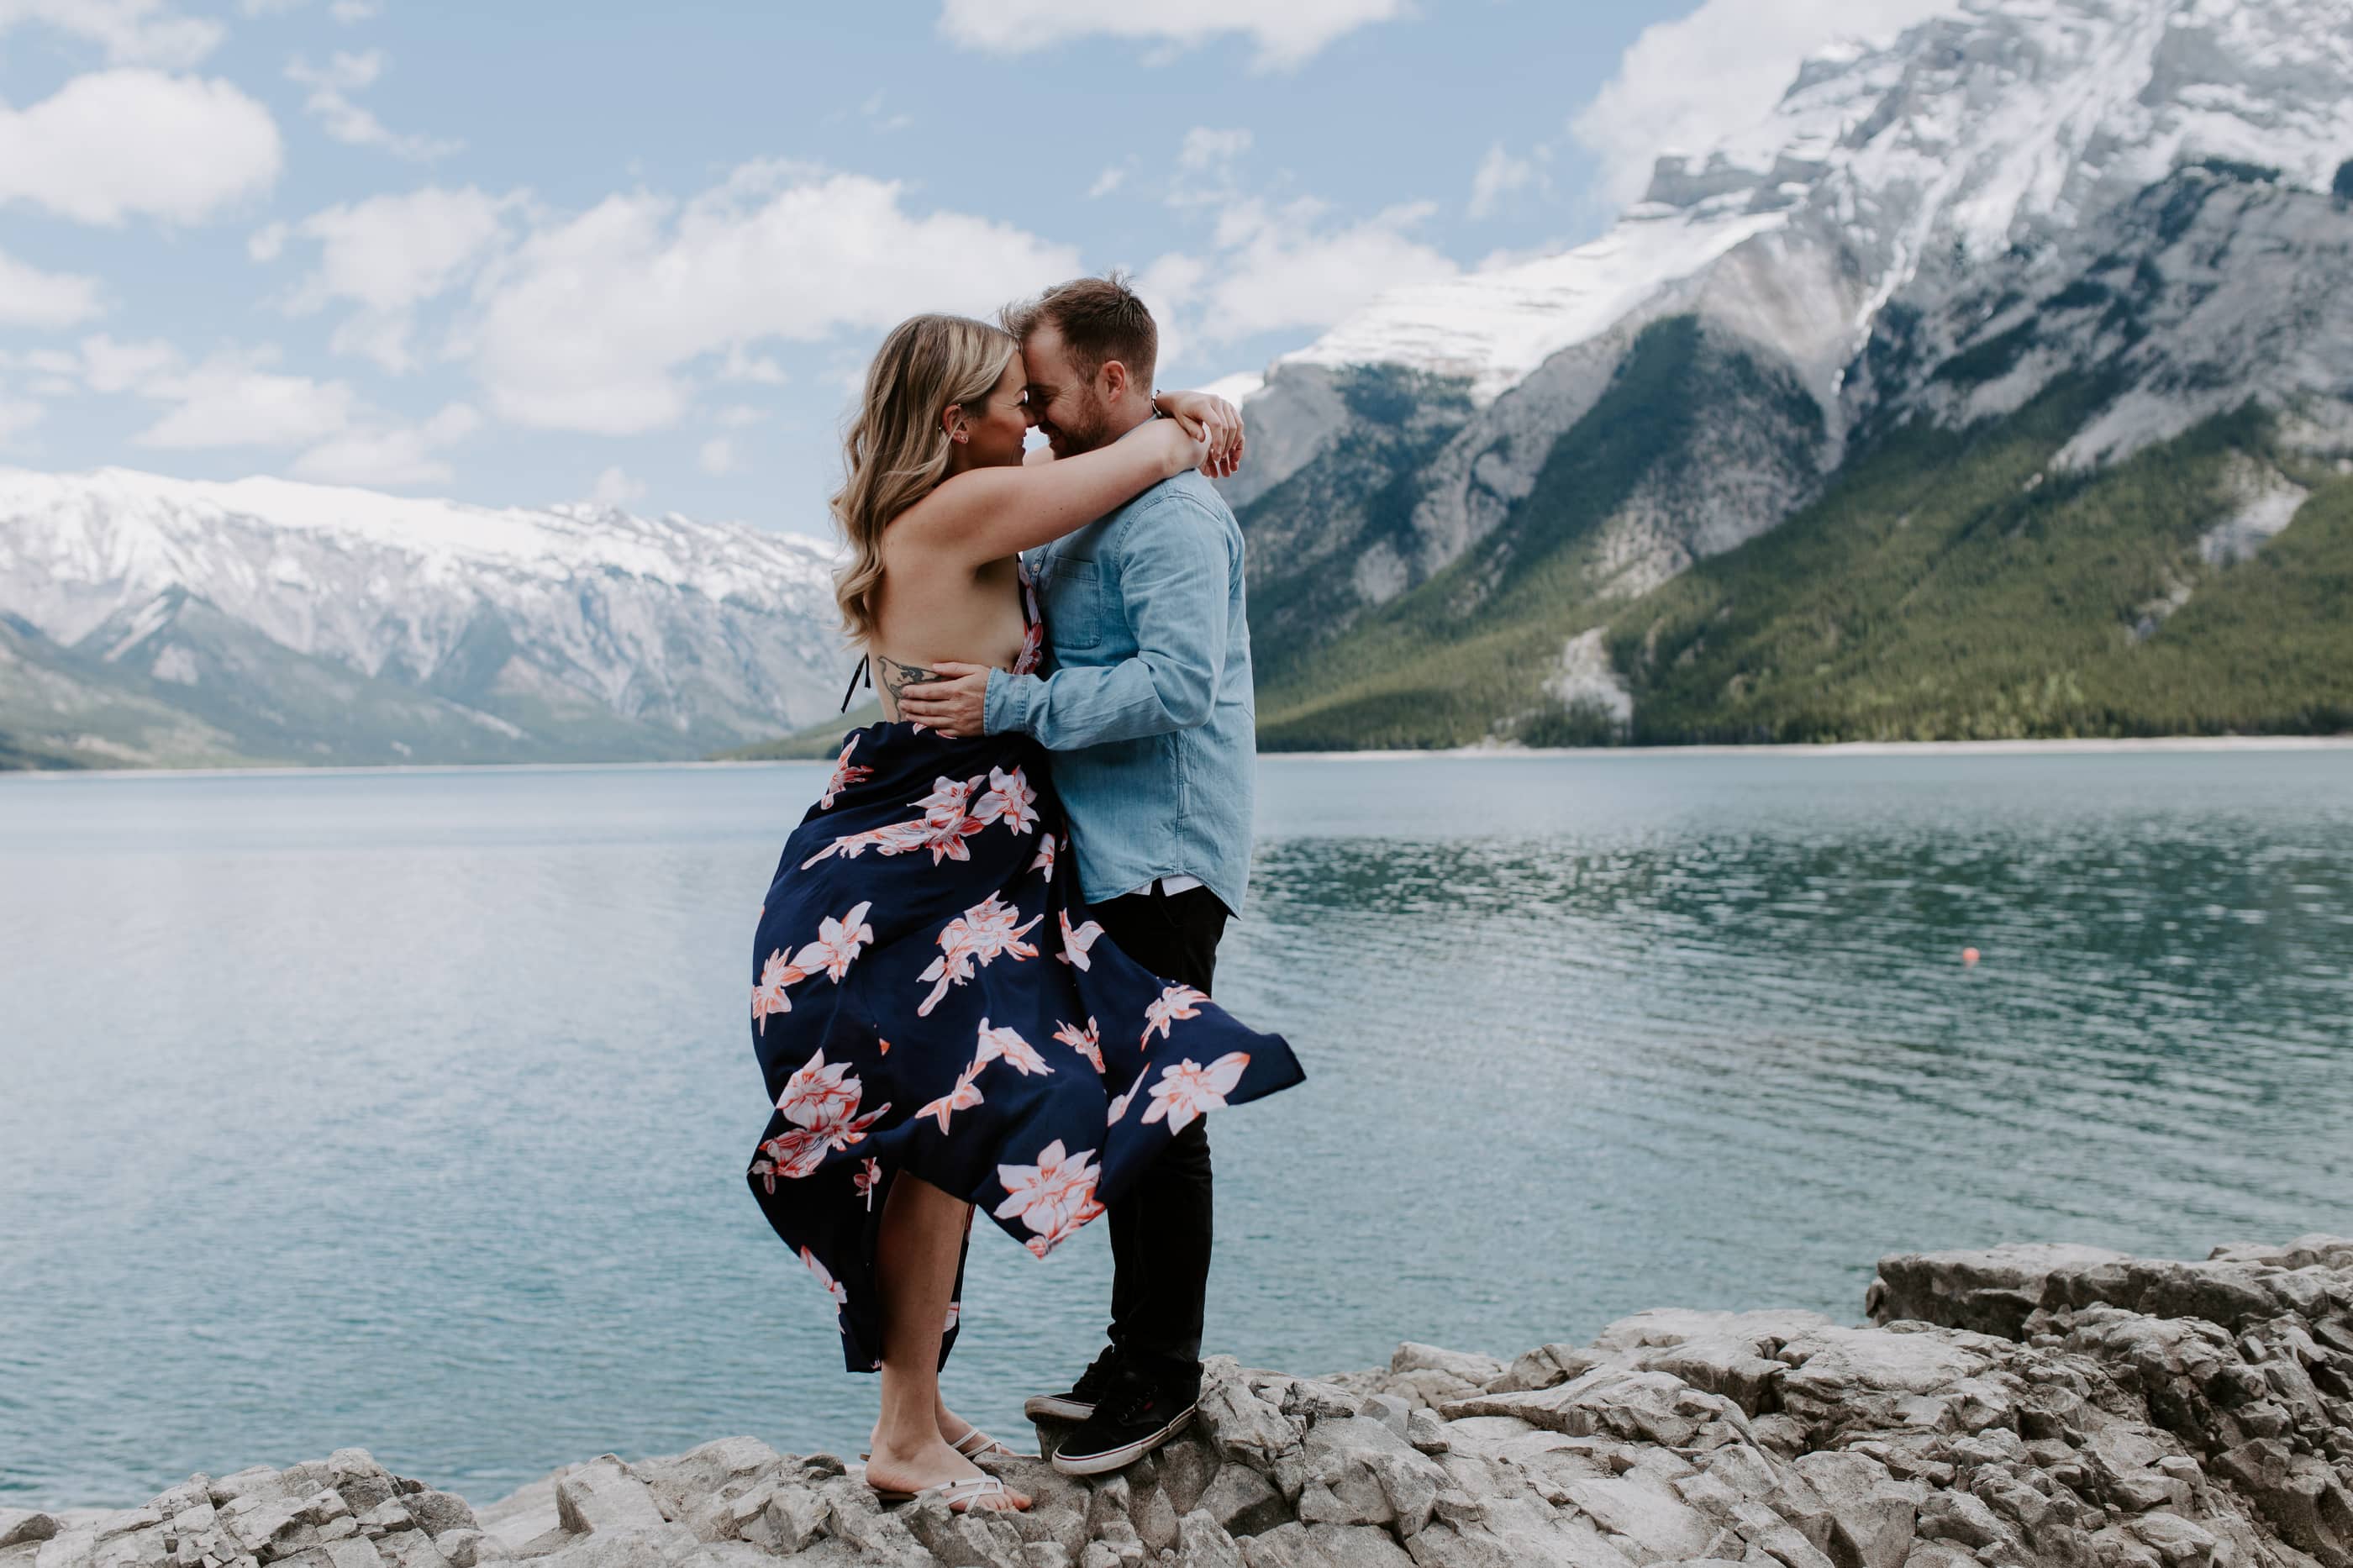 Couple holding each other standing on a rock in front of a lake and mountain range. Kitchener Waterloo Wedding Photographer.